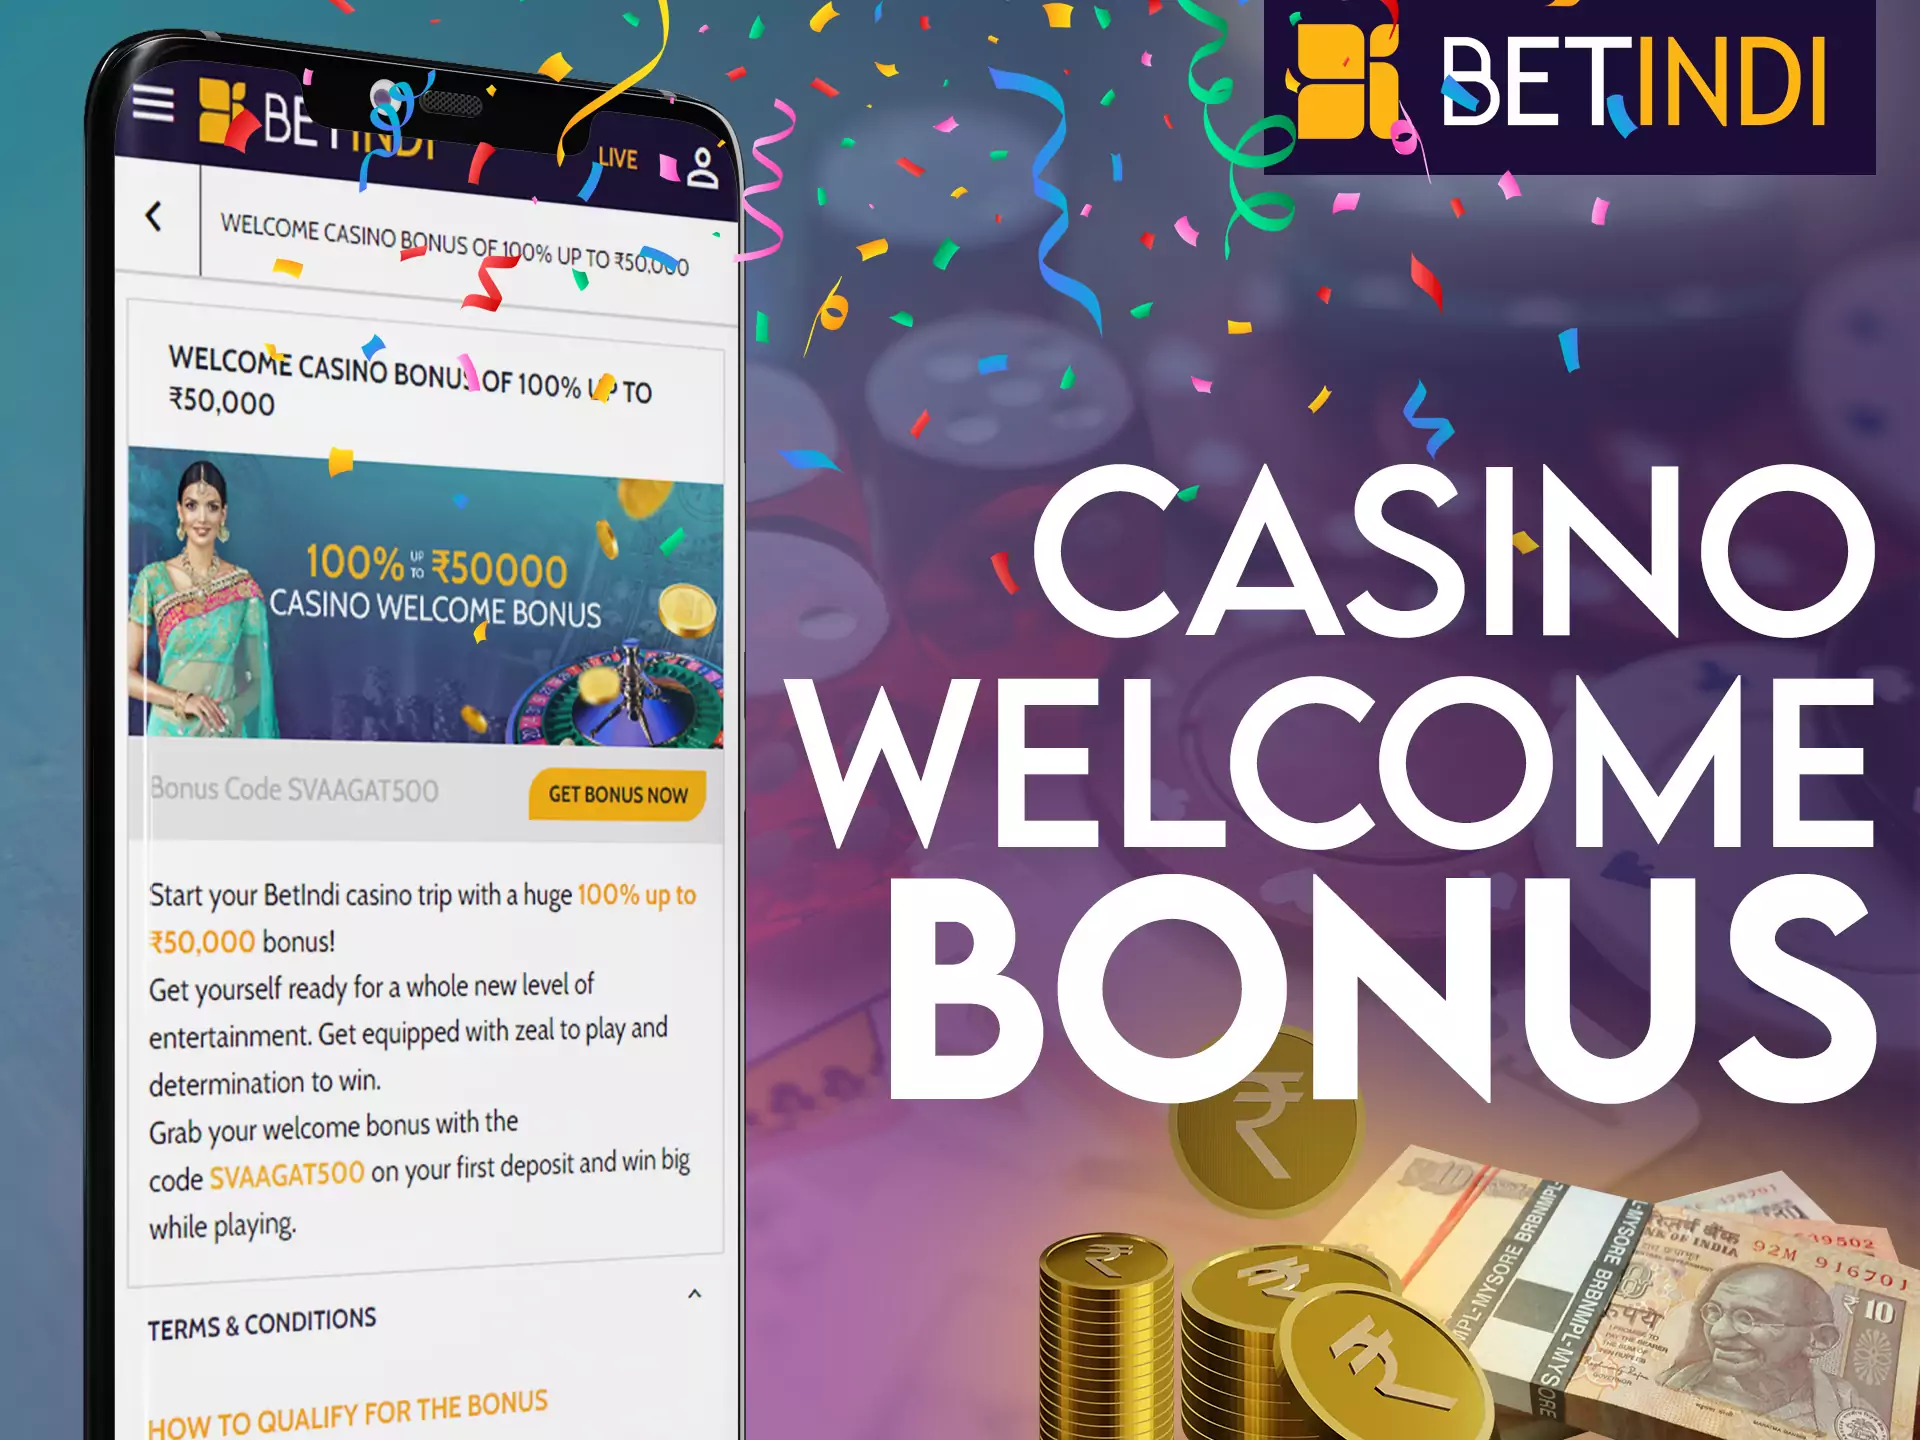 Betindi gives players a nice welcome bonus for casino games after registration.